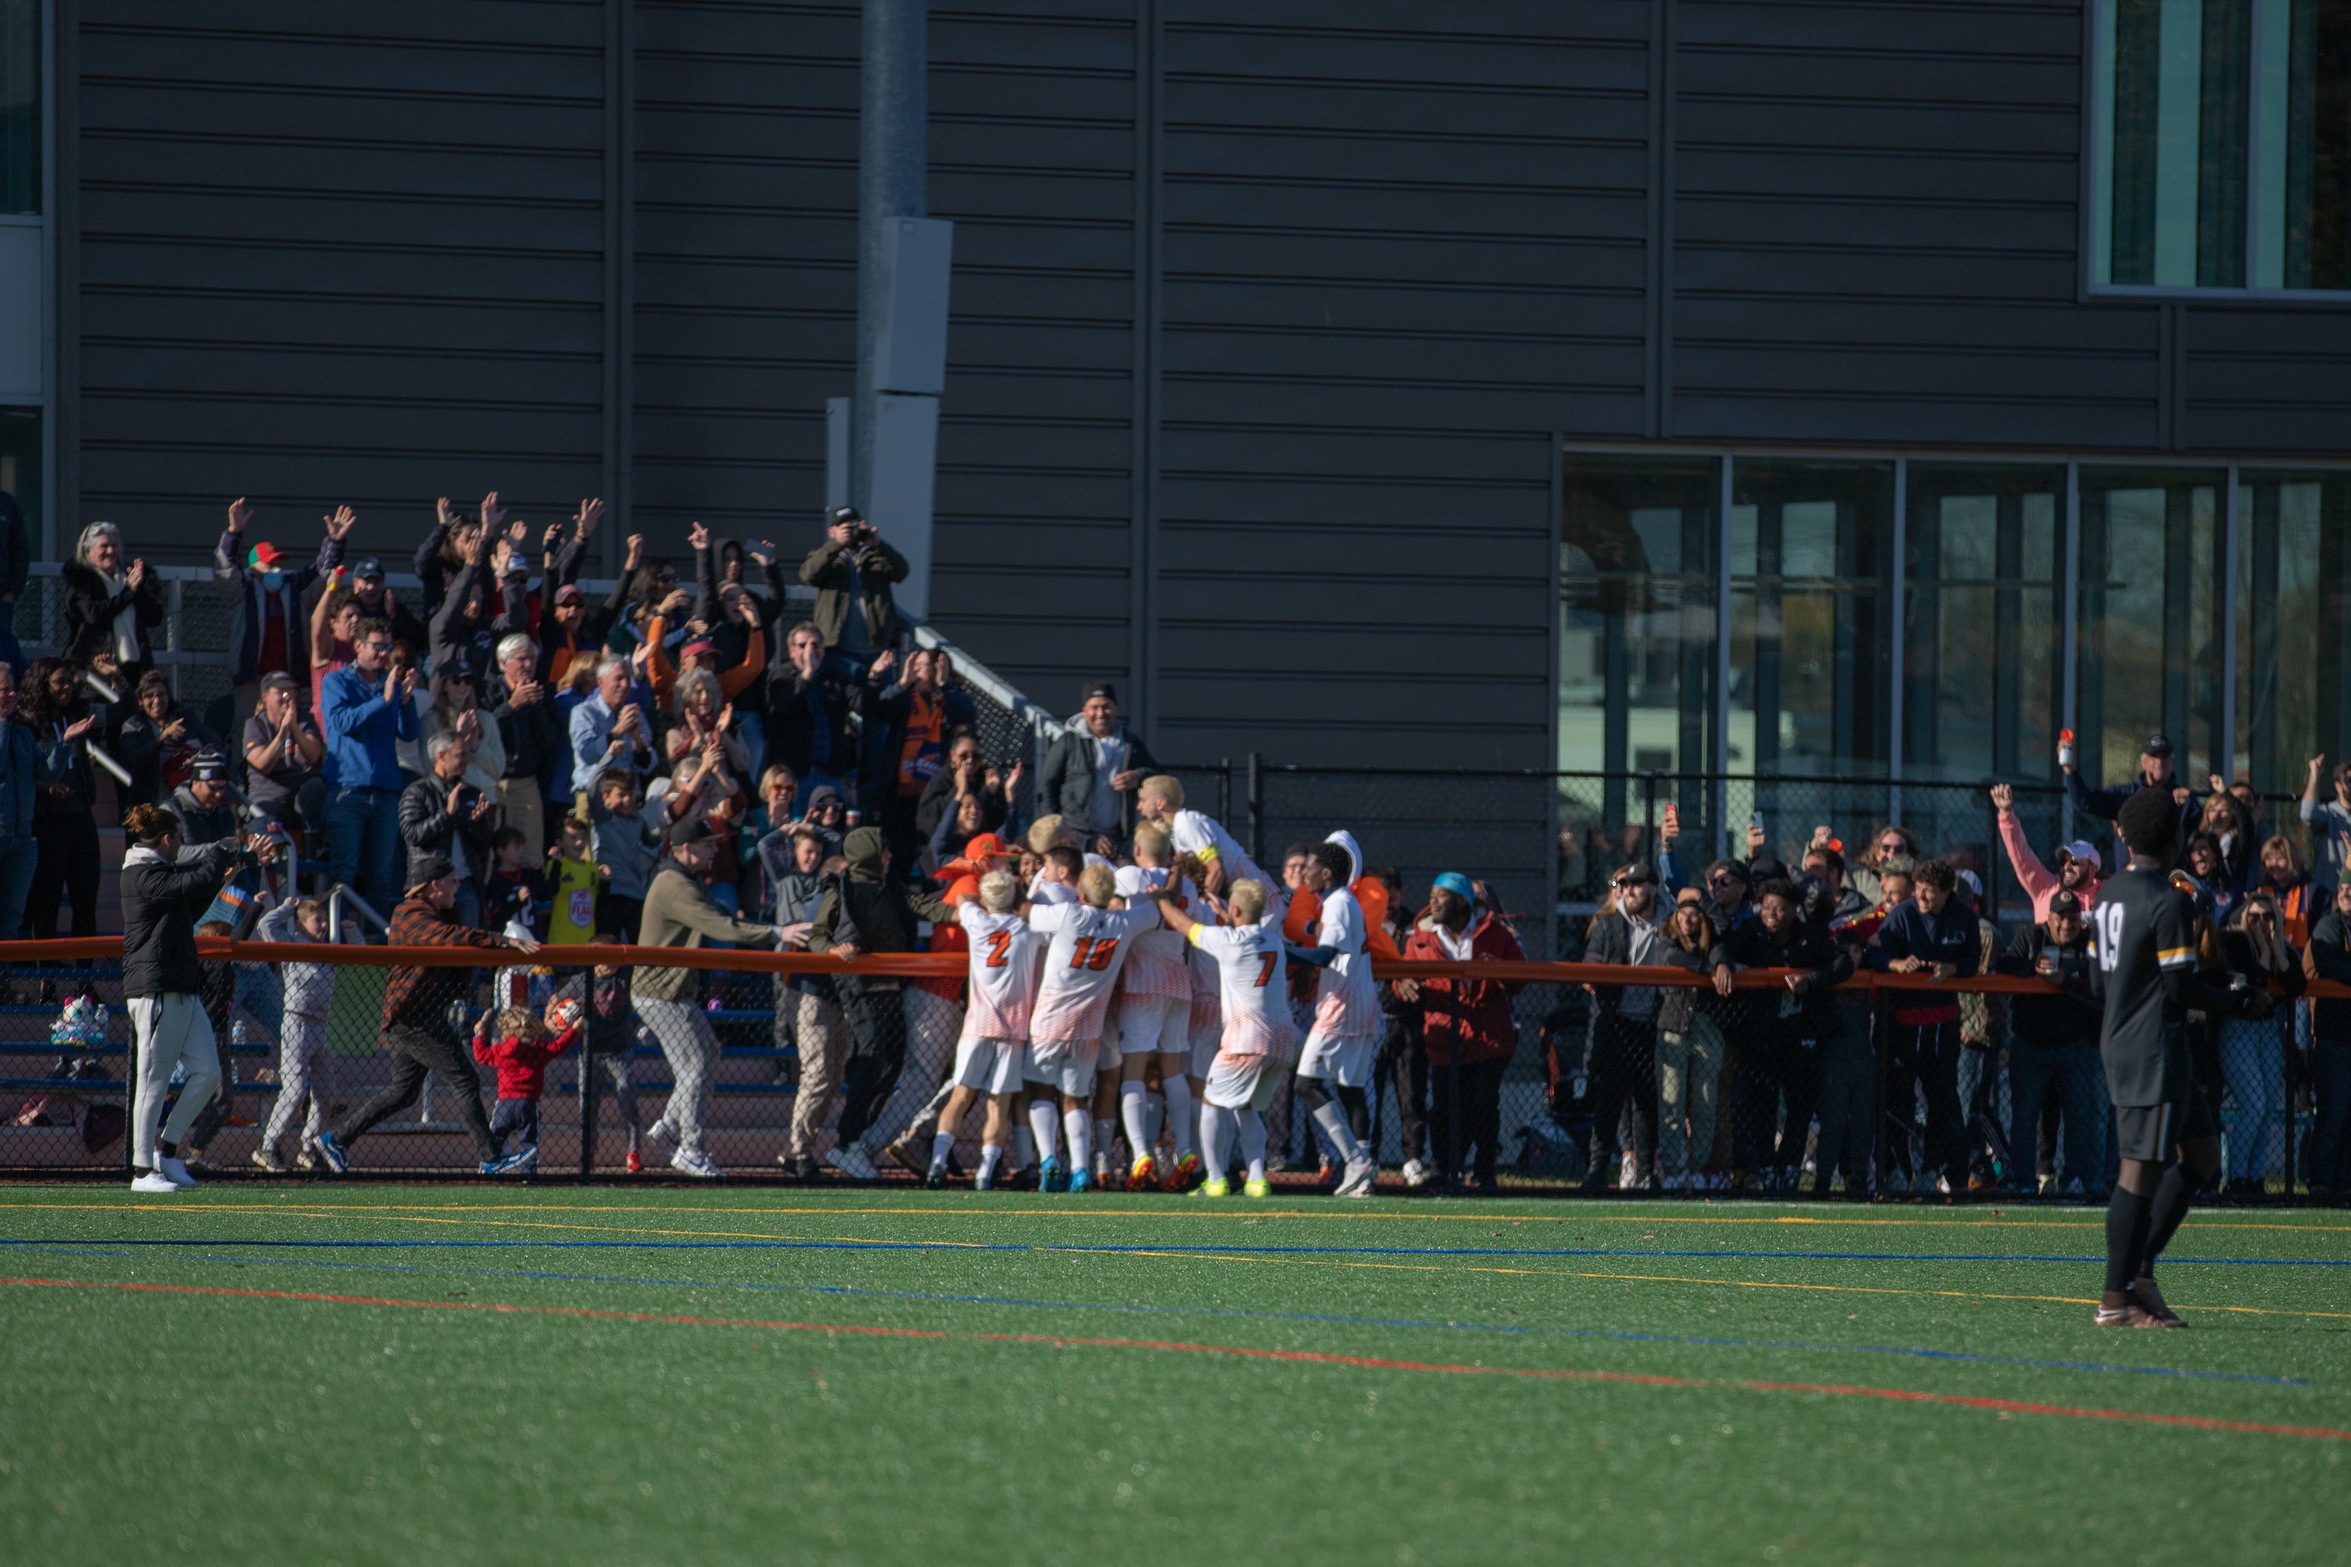 Salem State Comes Up Short in NCAA Tournament, Loses 3-2 to No. 6 Connecticut College in Penalty Shootout